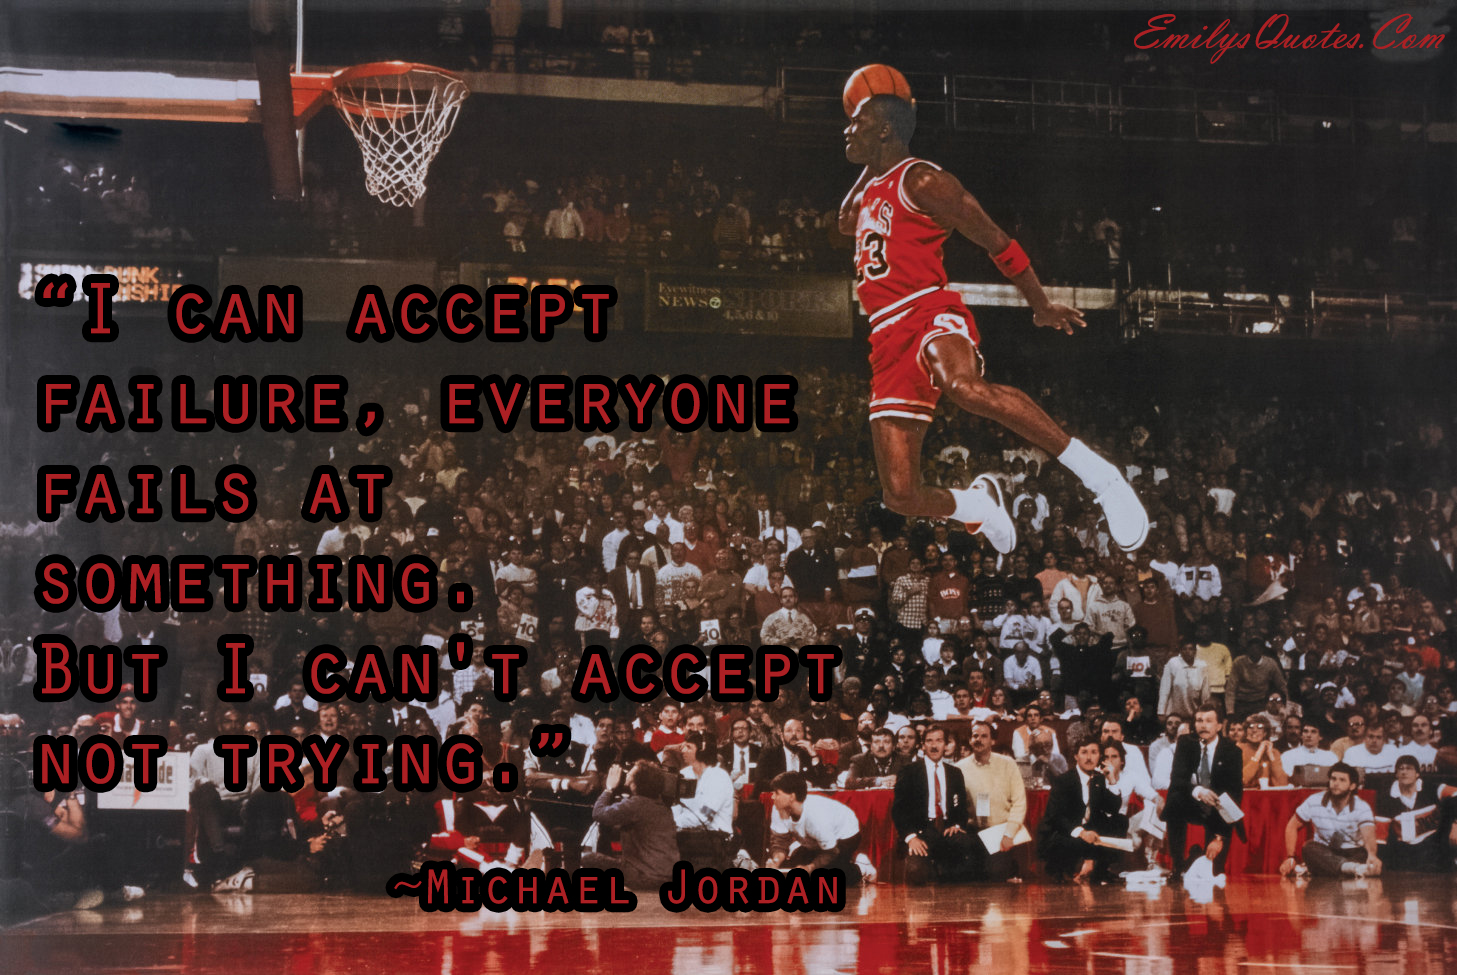 I can accept failure, everyone fails at something. But I can’t accept not trying